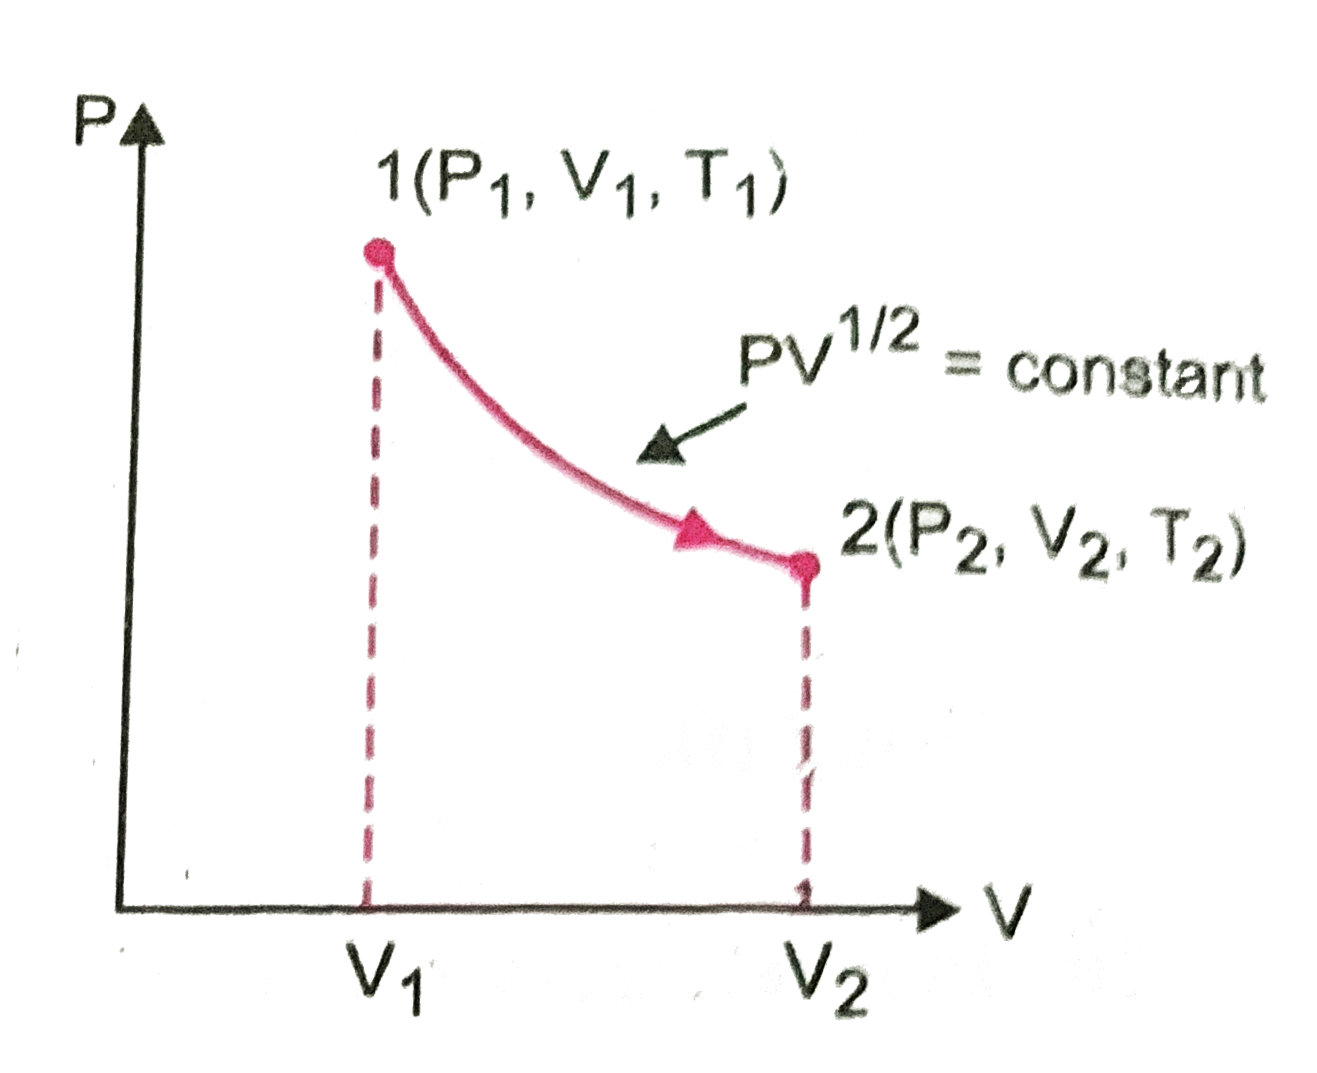 Consider a P-V diagram in which the path followed by one mole of perfect gas in a cyclinderical container is shown in (figure)   (a) Find the work done when the gas is taken from state 1 to state 2.   (b) What is the ratio of temperatures T(1)//T(2), if V(2)= 2V(1)?   (c ) Given the internal energy for one mole of gas at temperature T is (3//2) RT, find the heat supplied to the gas when it is taken from state 1 to 2, with V(2)= 2V(1).